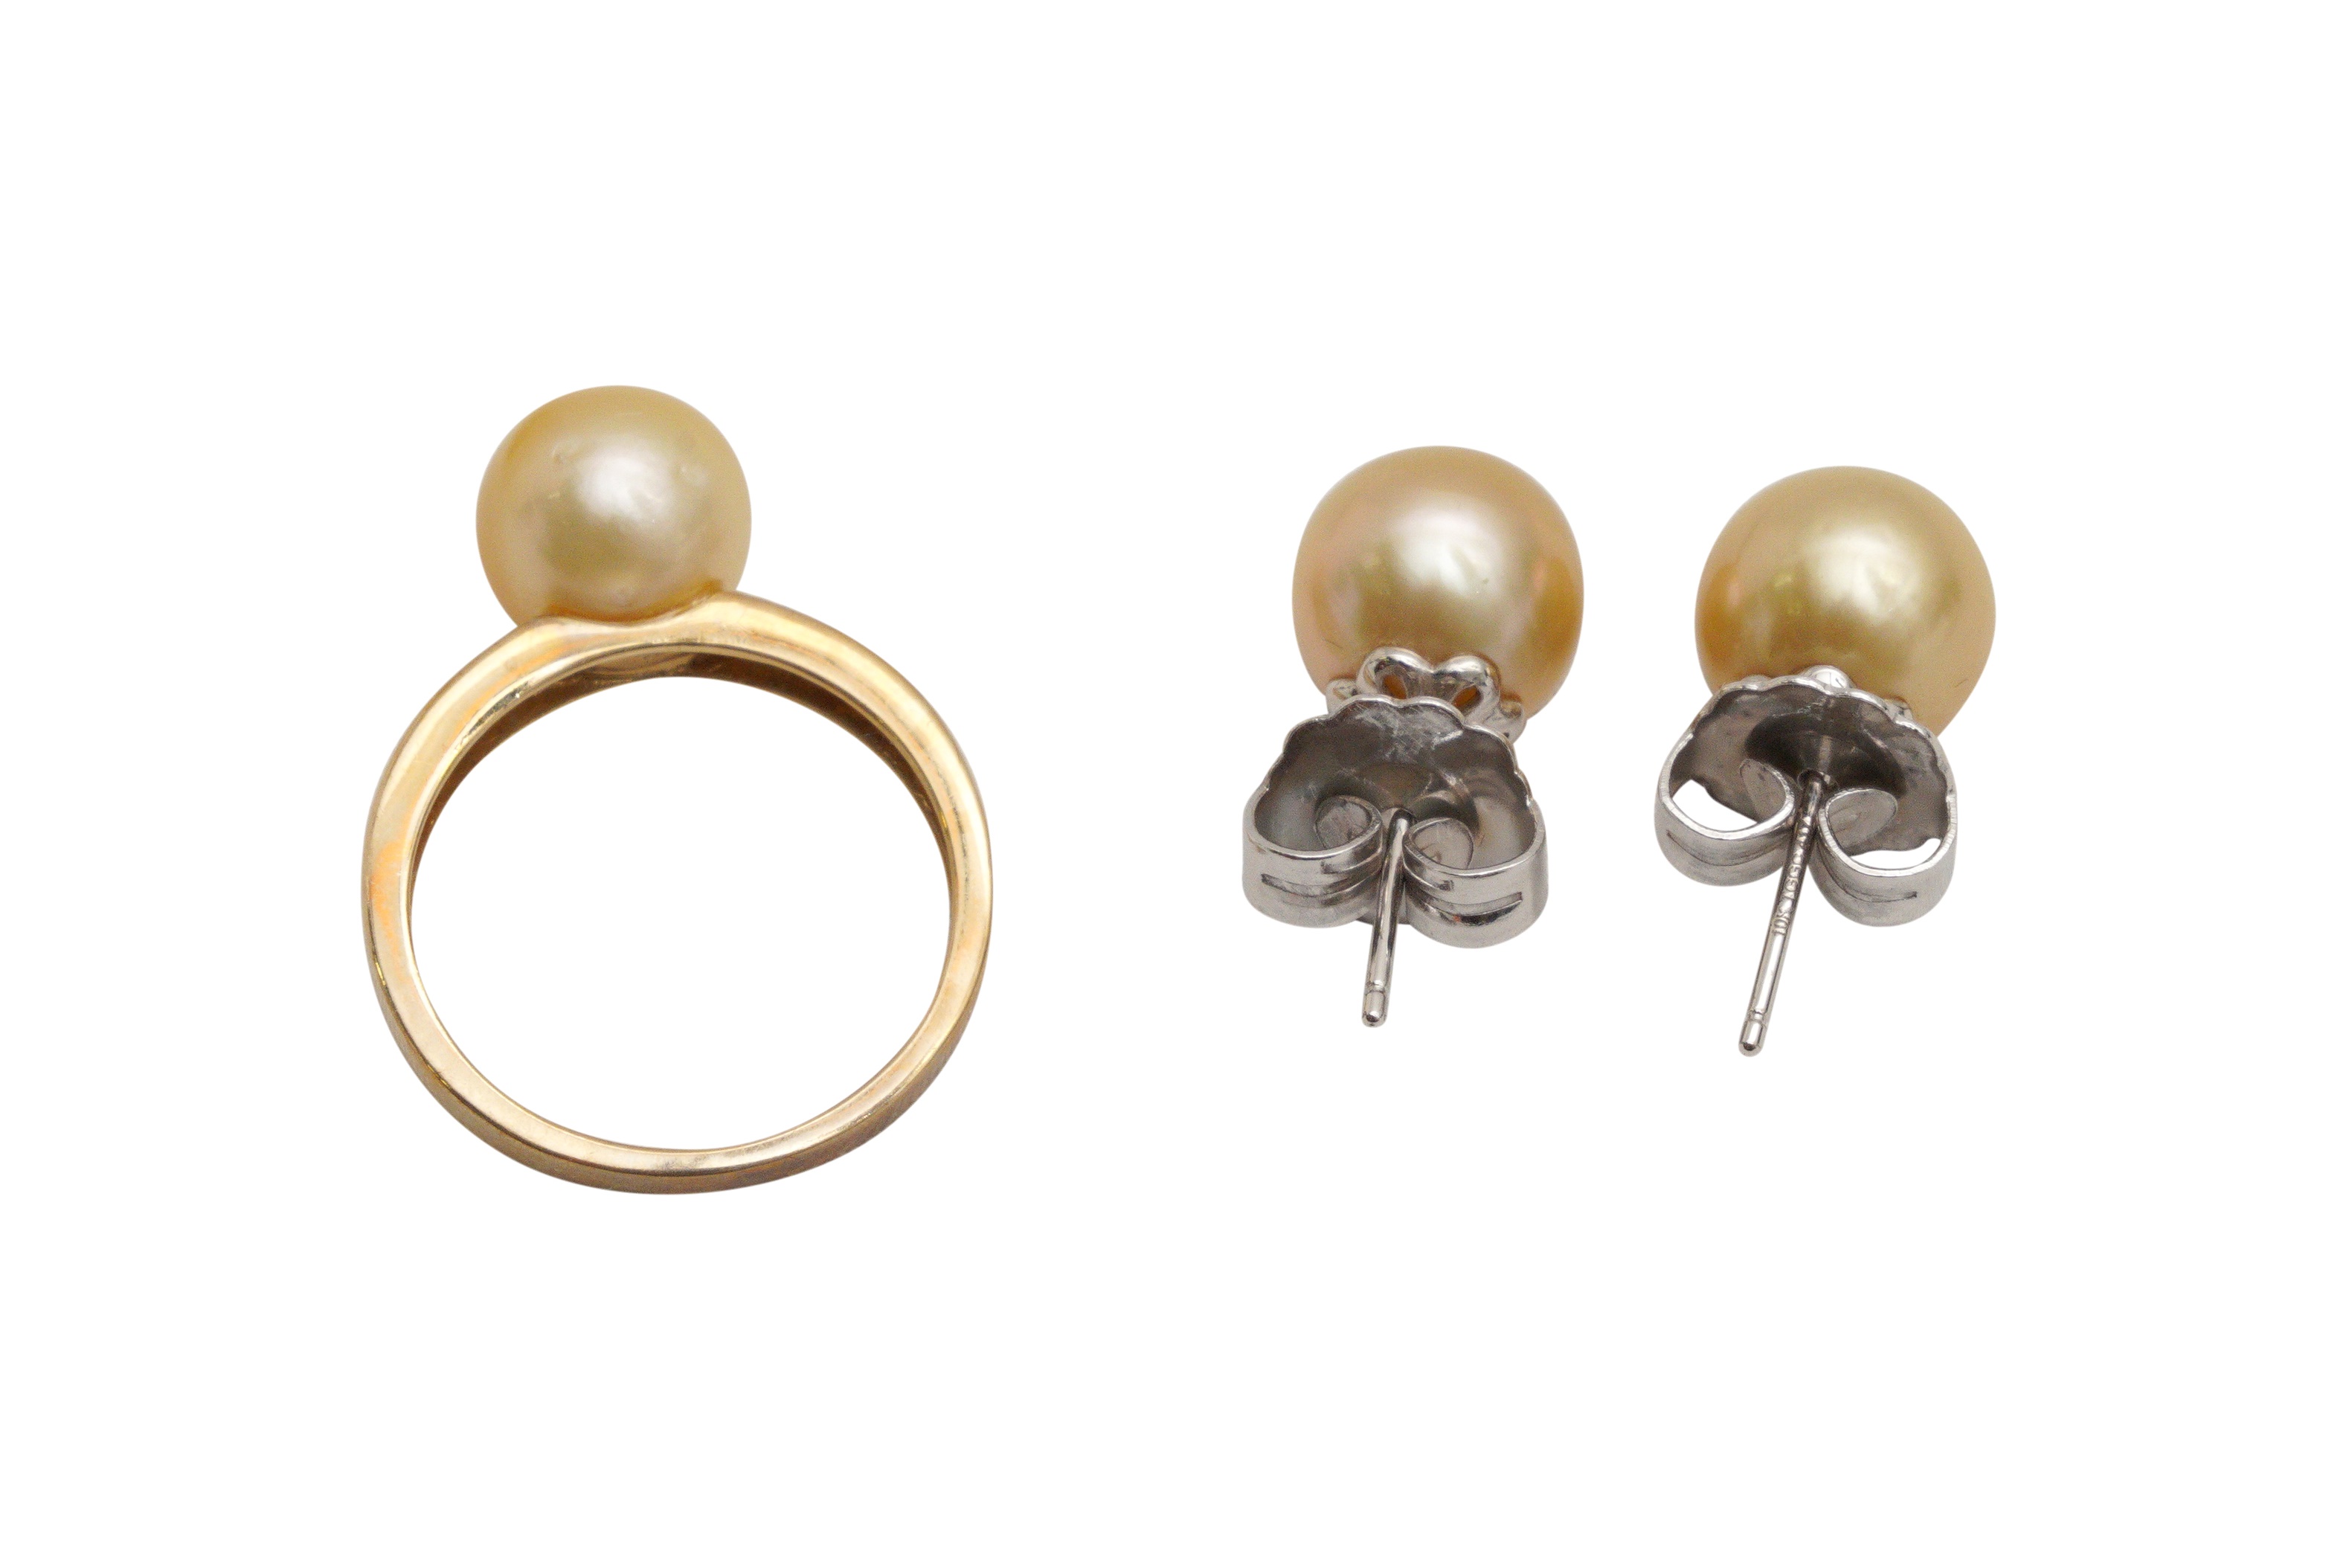 A YELLOW PEARL RING AND A PAIR OF EARRINGS - Image 2 of 2